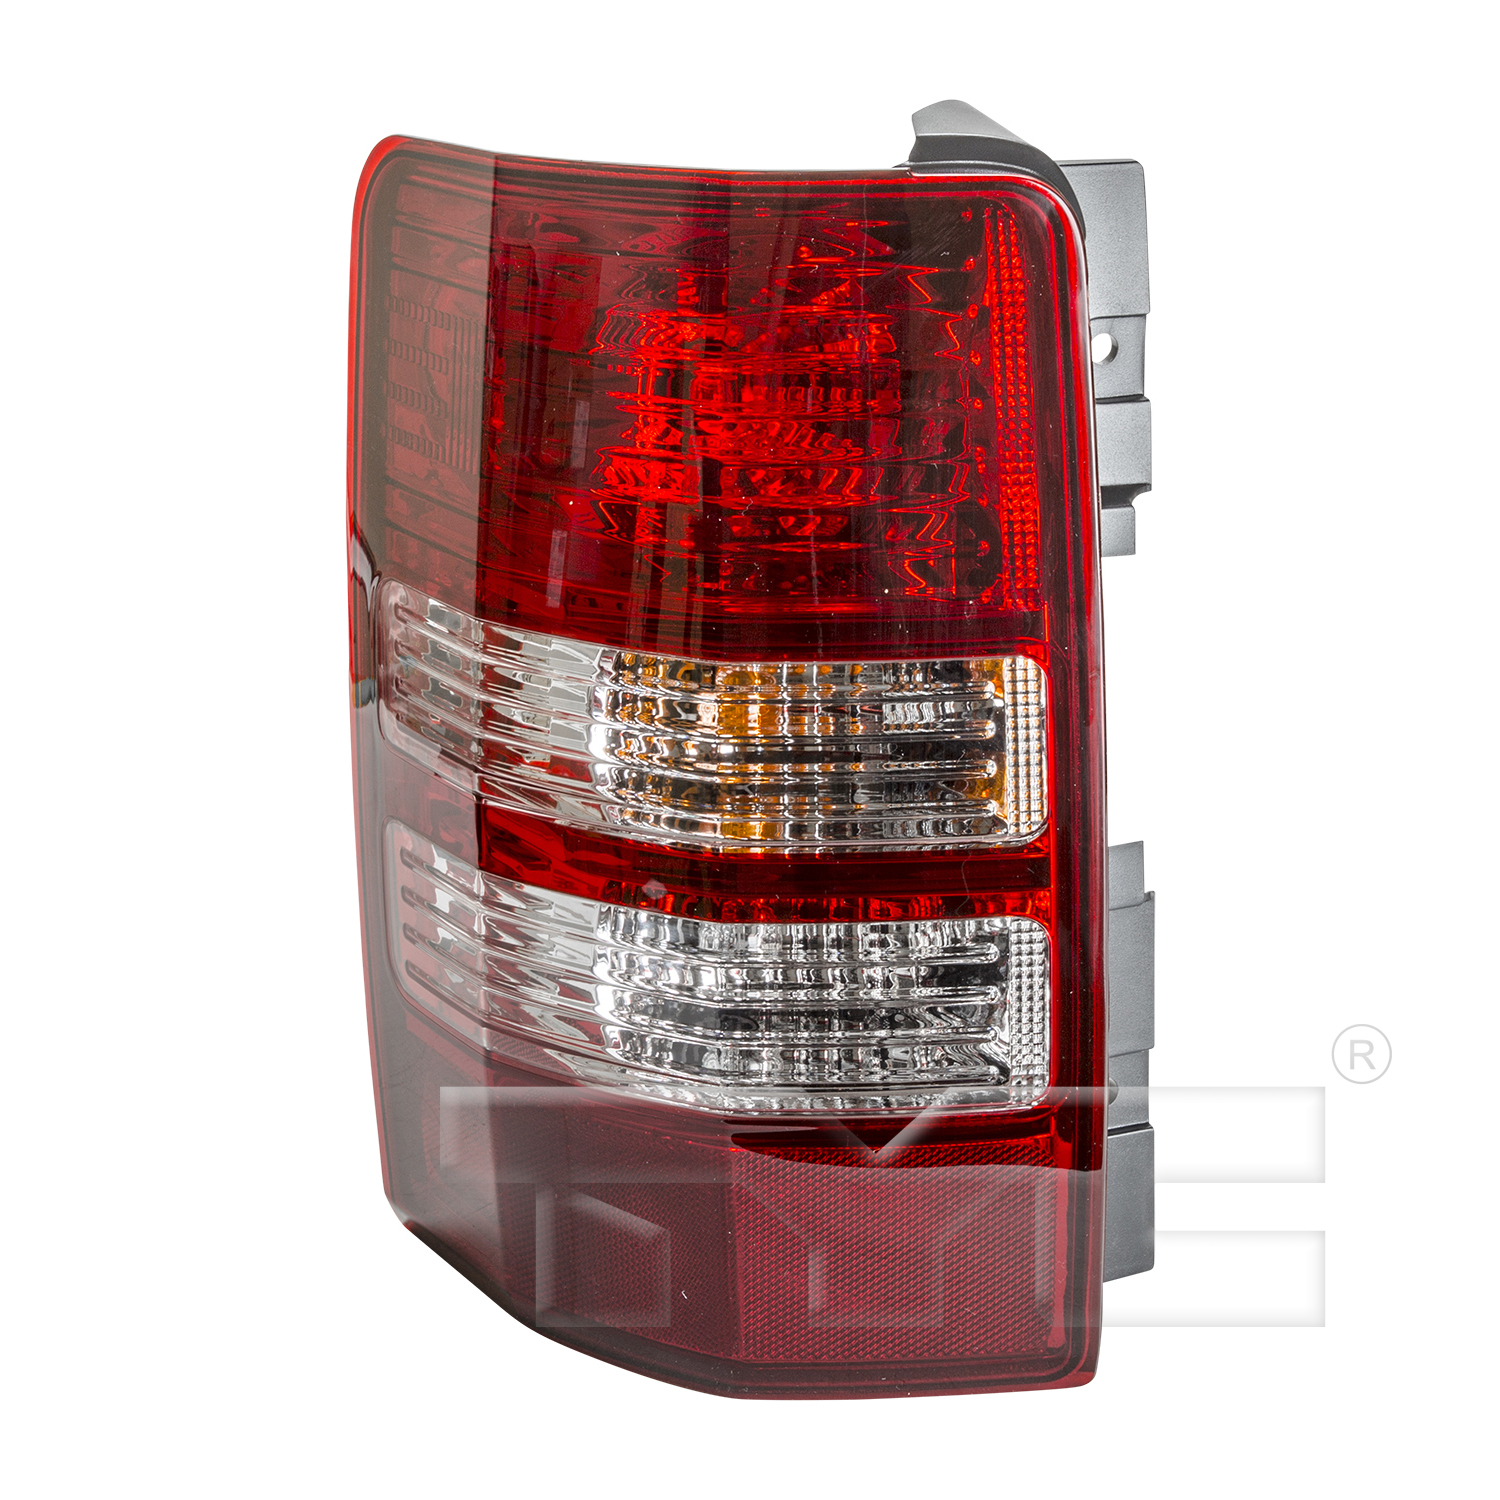 Aftermarket TAILLIGHTS for JEEP - LIBERTY, LIBERTY,08-12,LT Taillamp assy